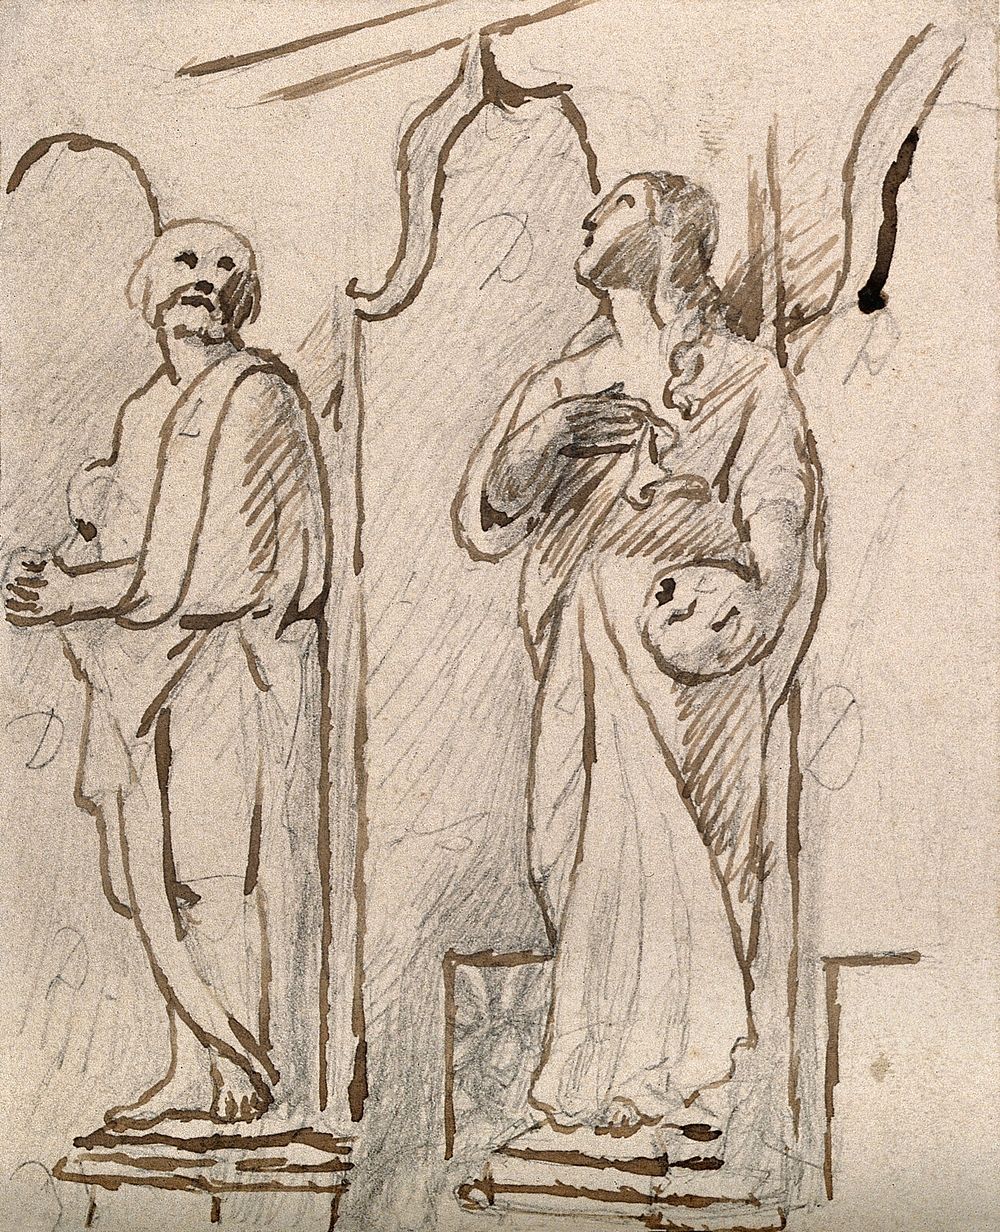 Statues of an apostle and Christ . Drawing, c. 1793.